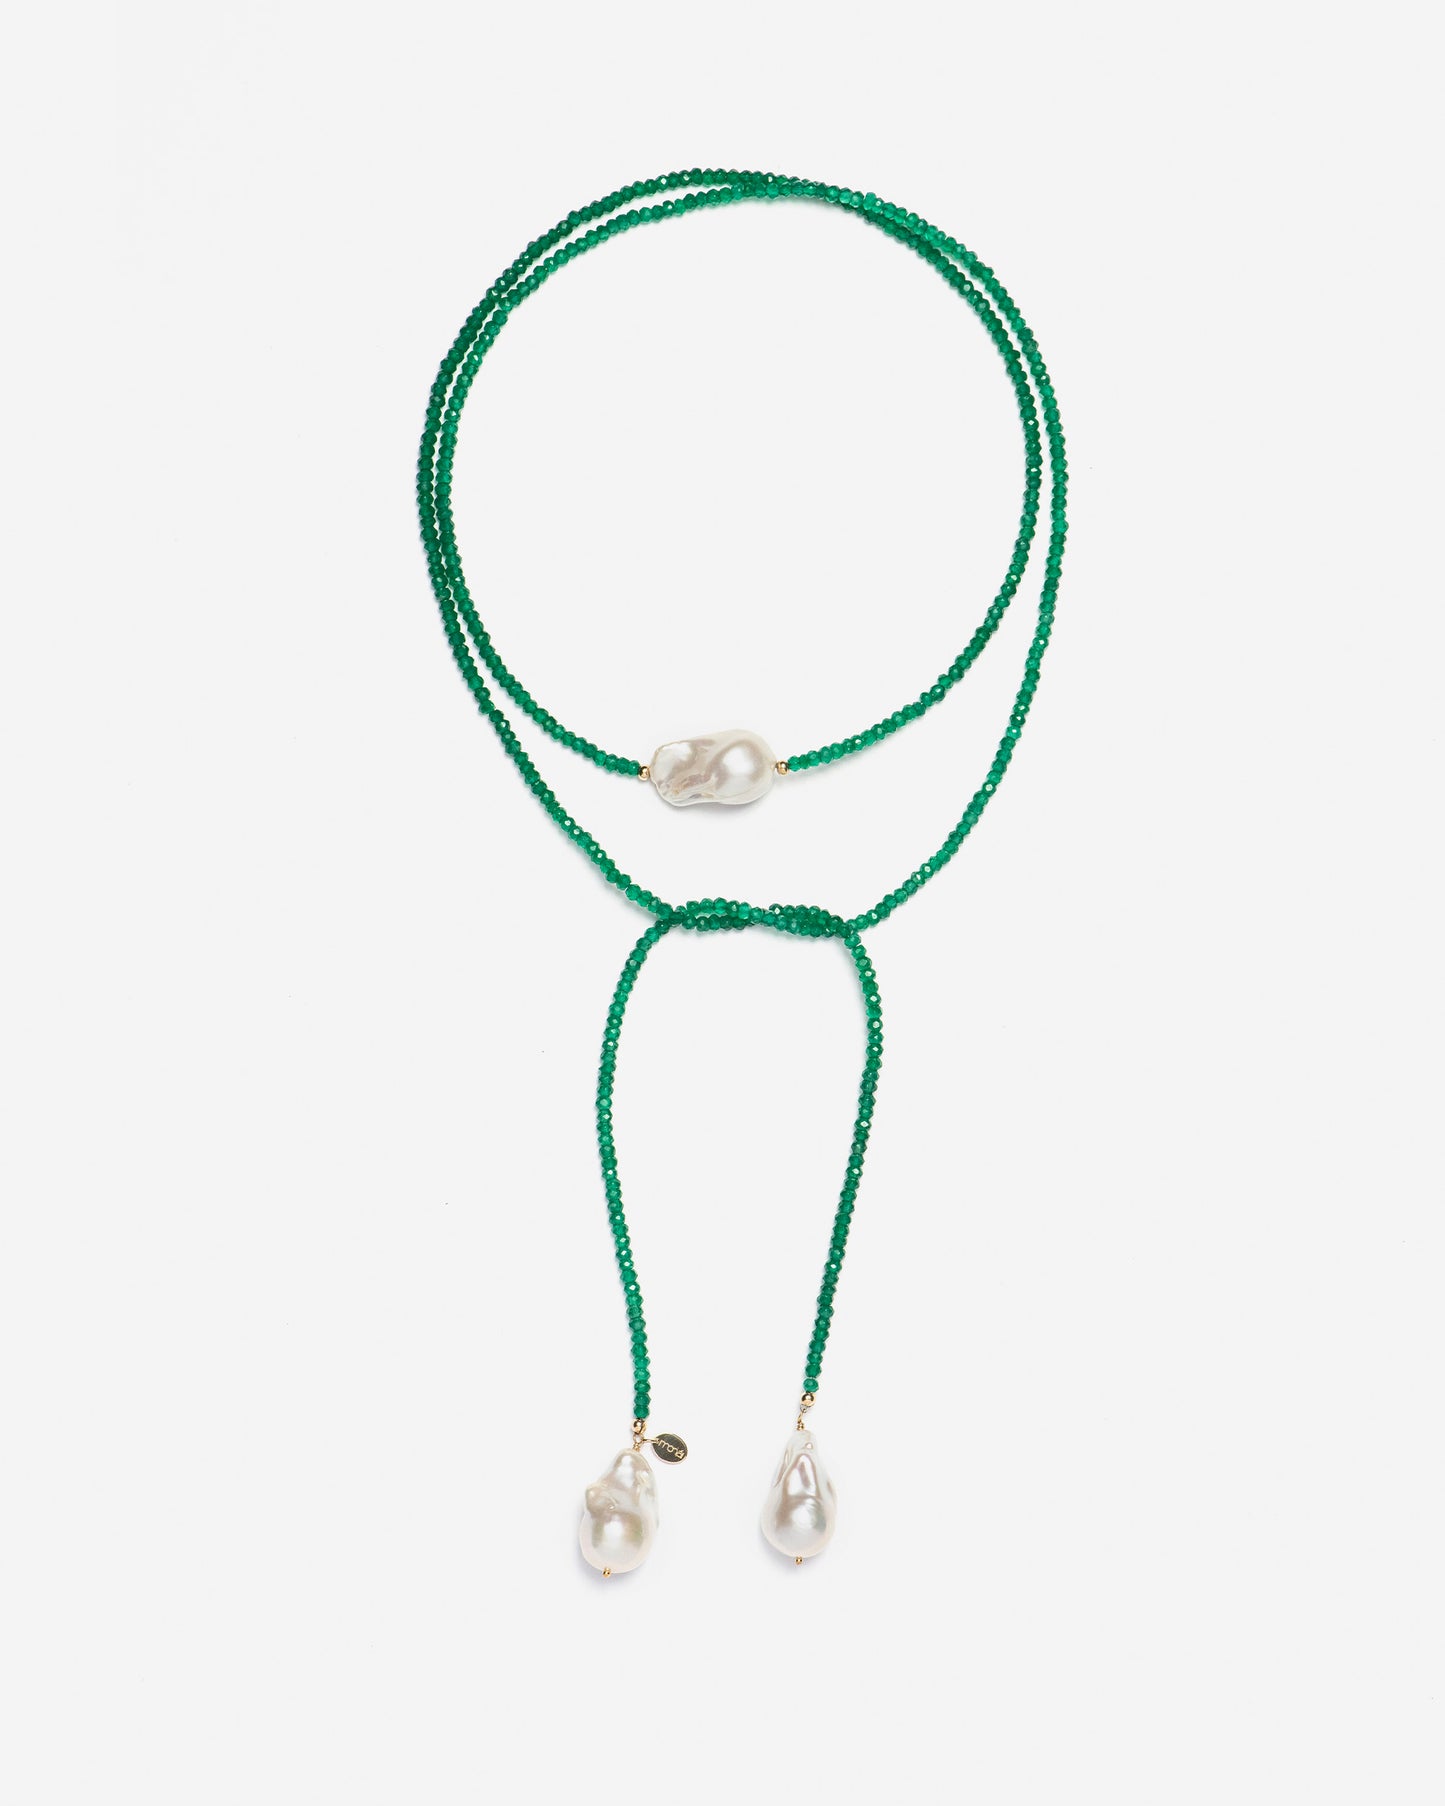 3 Baroque Pearl Green Onyx Necklace